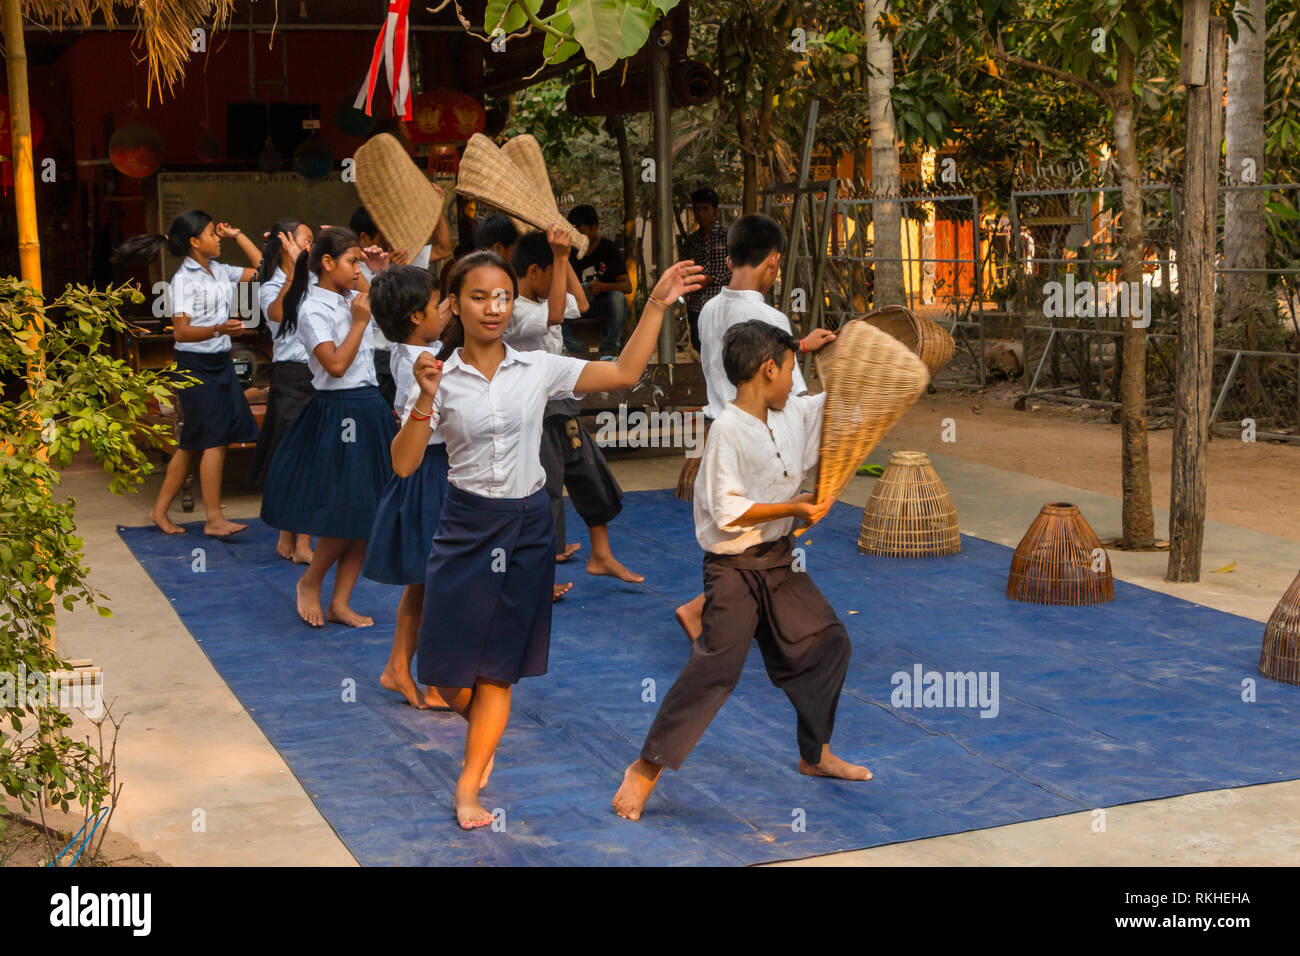 Cambodan school children wearing school uniform, perform traditional dance for tourists at Siem Reap, Cambodia, Asia Stock Photo